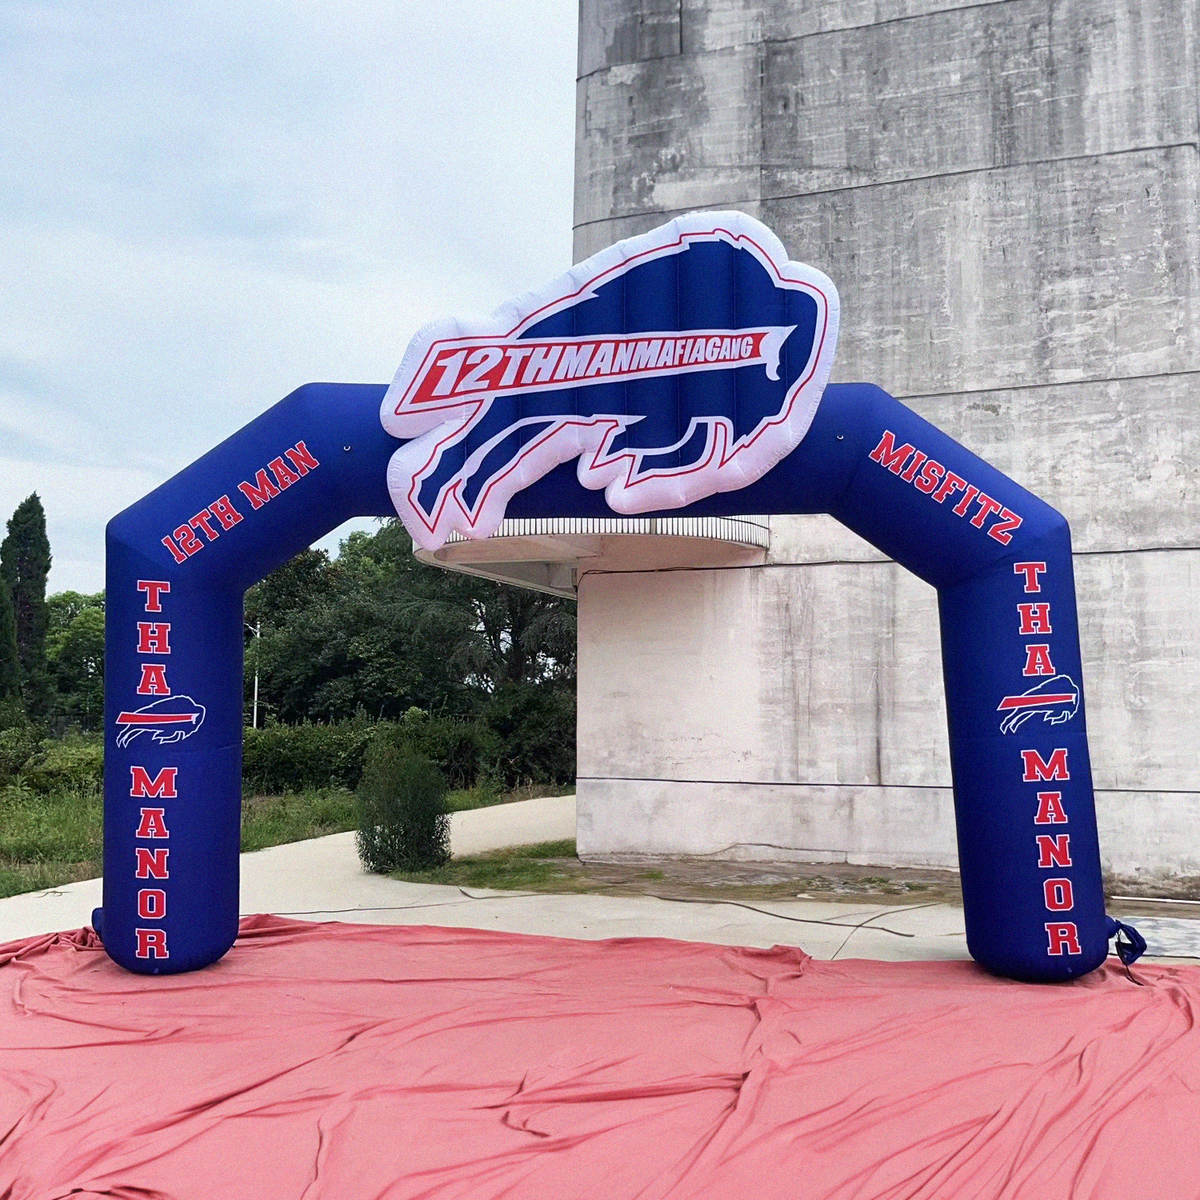  12th man arch inflatable